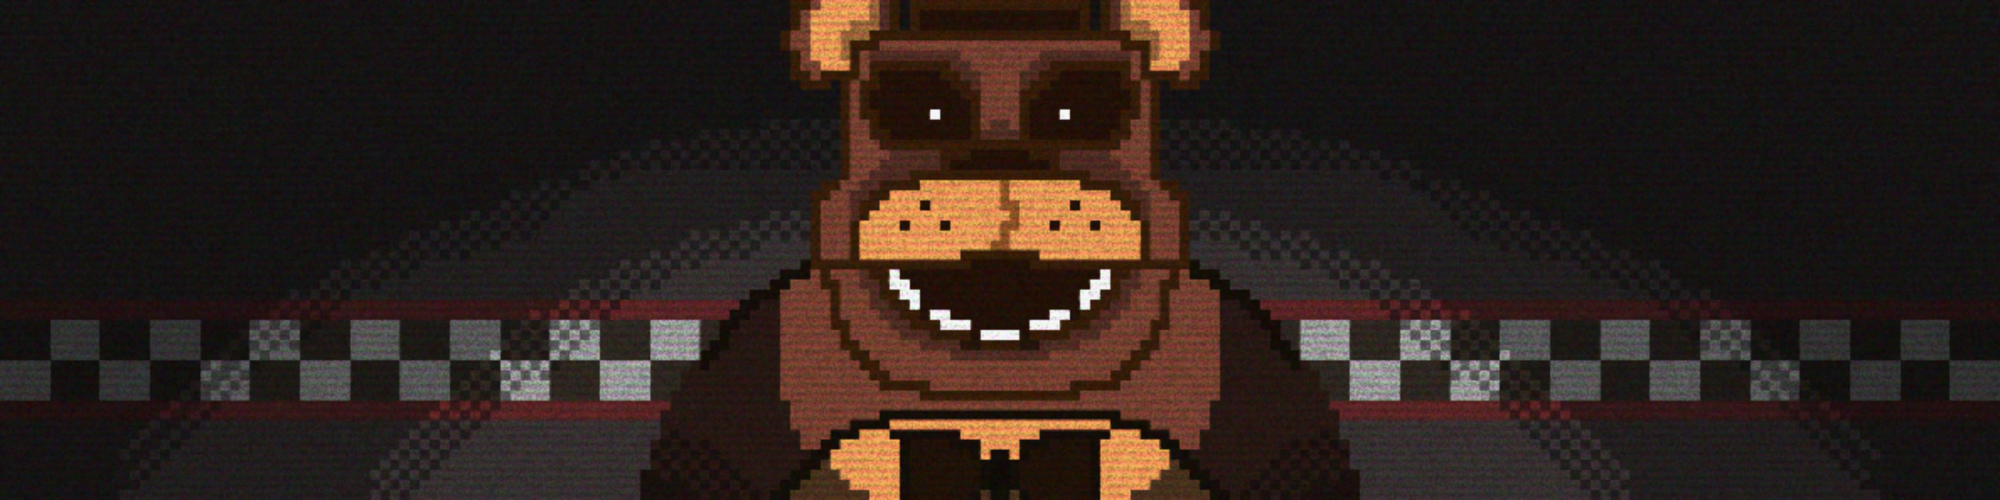 Five Nights at Freddy's Pixel Art Edition REMAKE